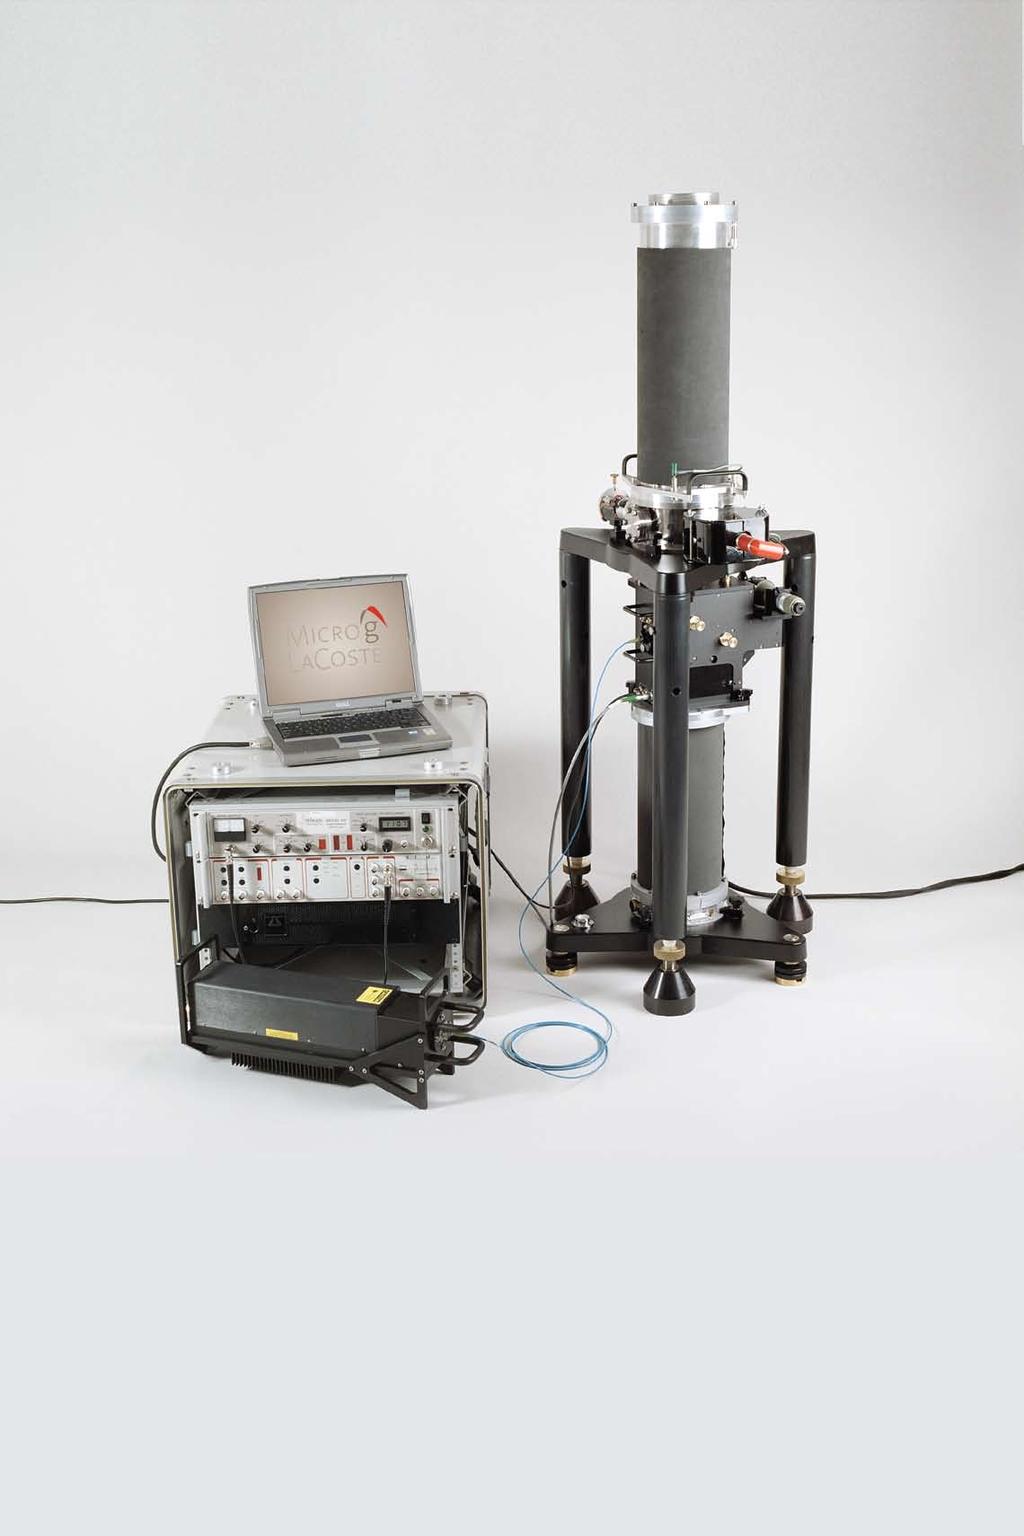 FG5 gravity meter To the best of our knowledge, the FG5 gravimeter represents the current